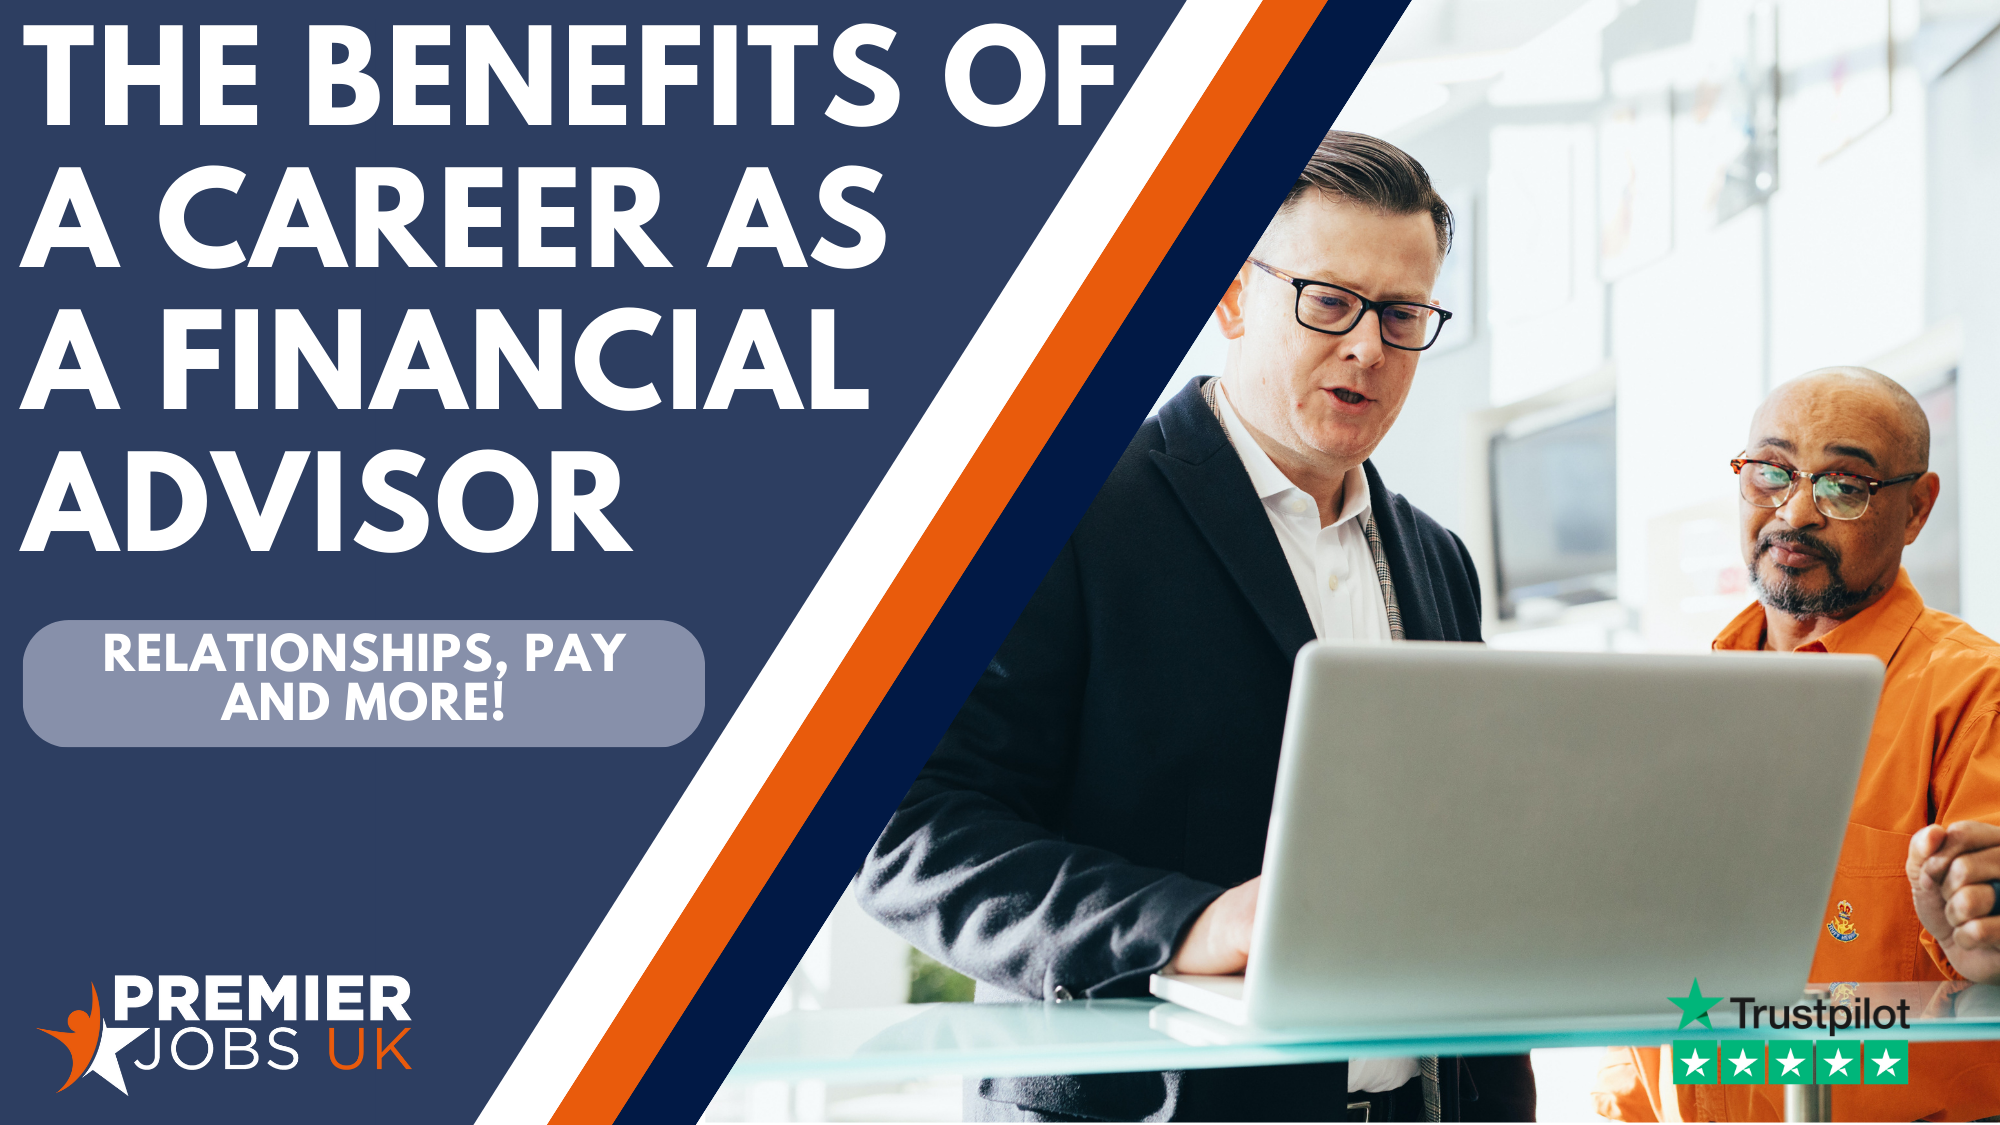 The Benefits of a Career as a Financial Advisor